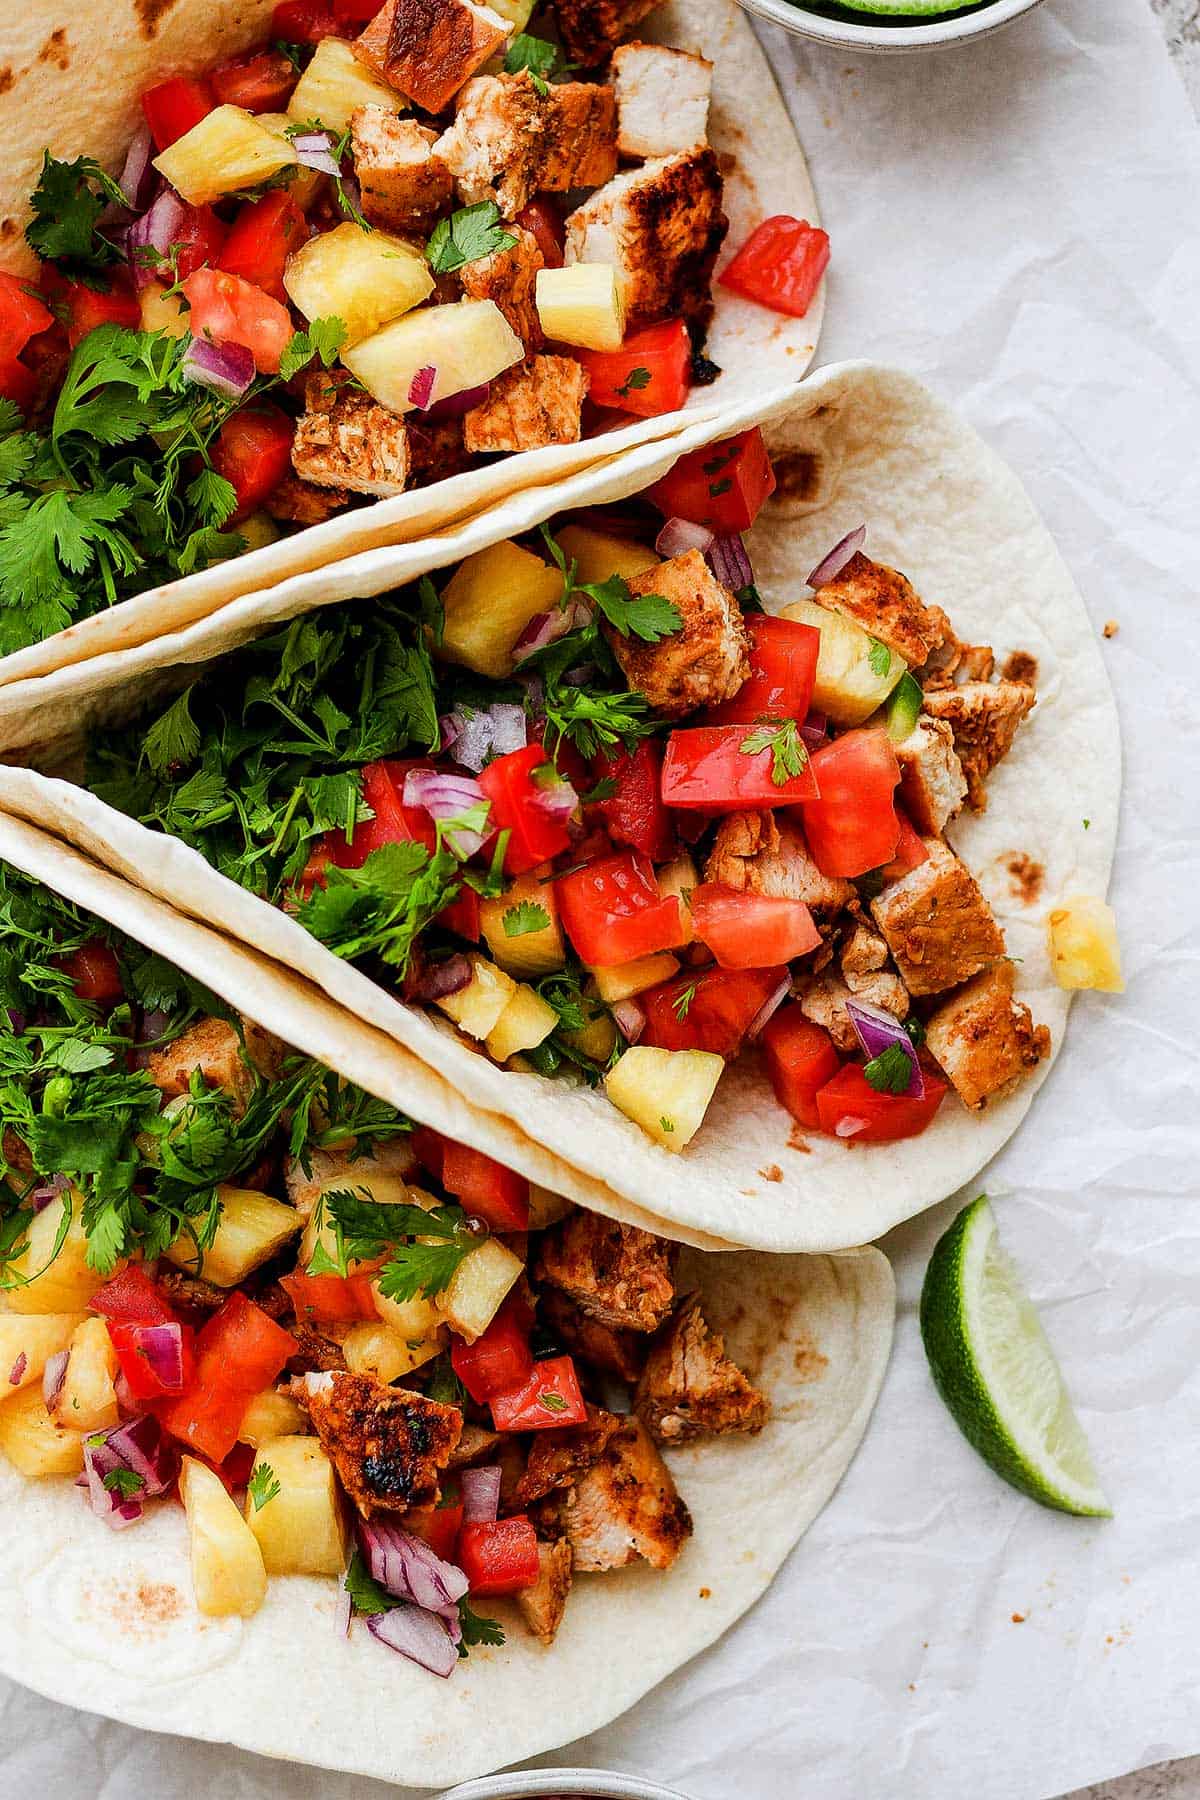 Three chicken tacos garnished with pineapple salsa and fresh cilantro are served in soft tortillas.